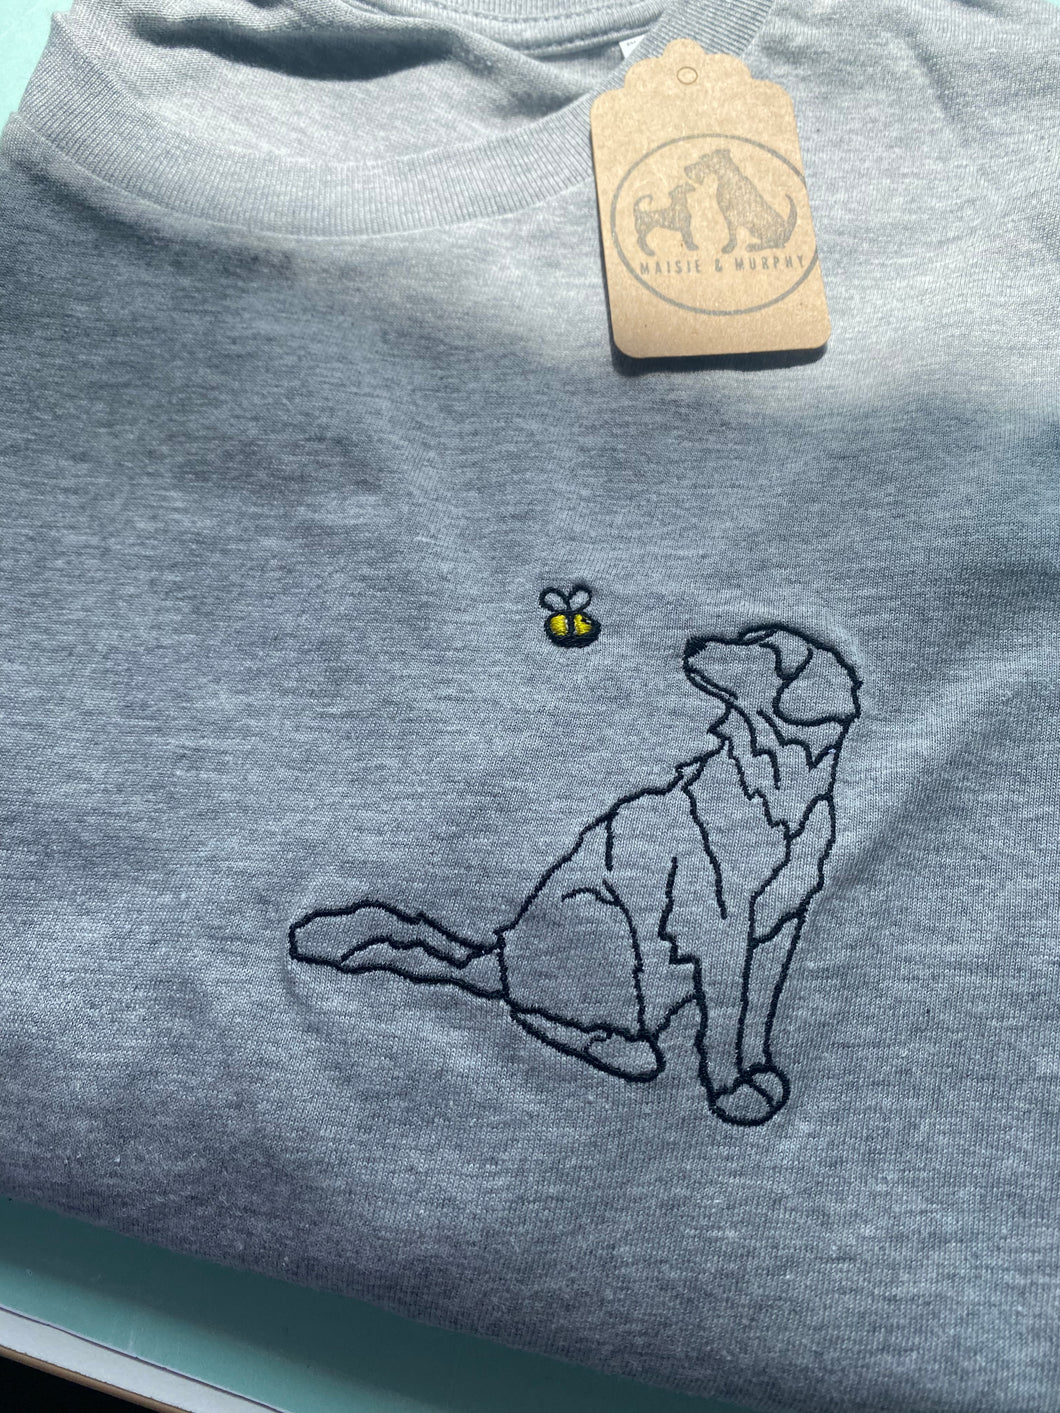 Toller Outline T-shirt - embroidered Nova Scotia duck retrieving Toller dog organic tee for dog lovers and owners